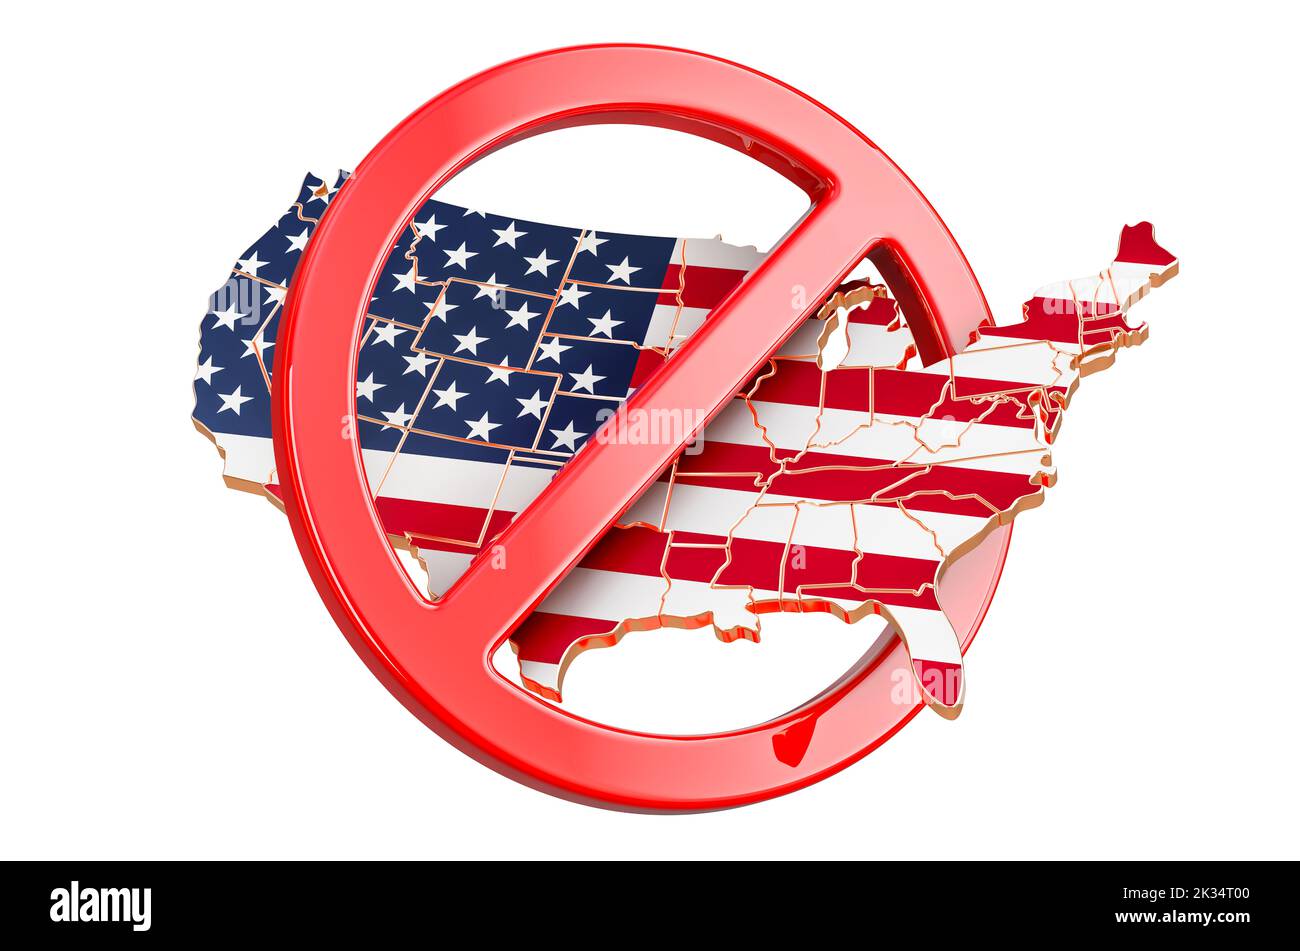 The United States map with forbidden sign, 3D rendering isolated on white background Stock Photo